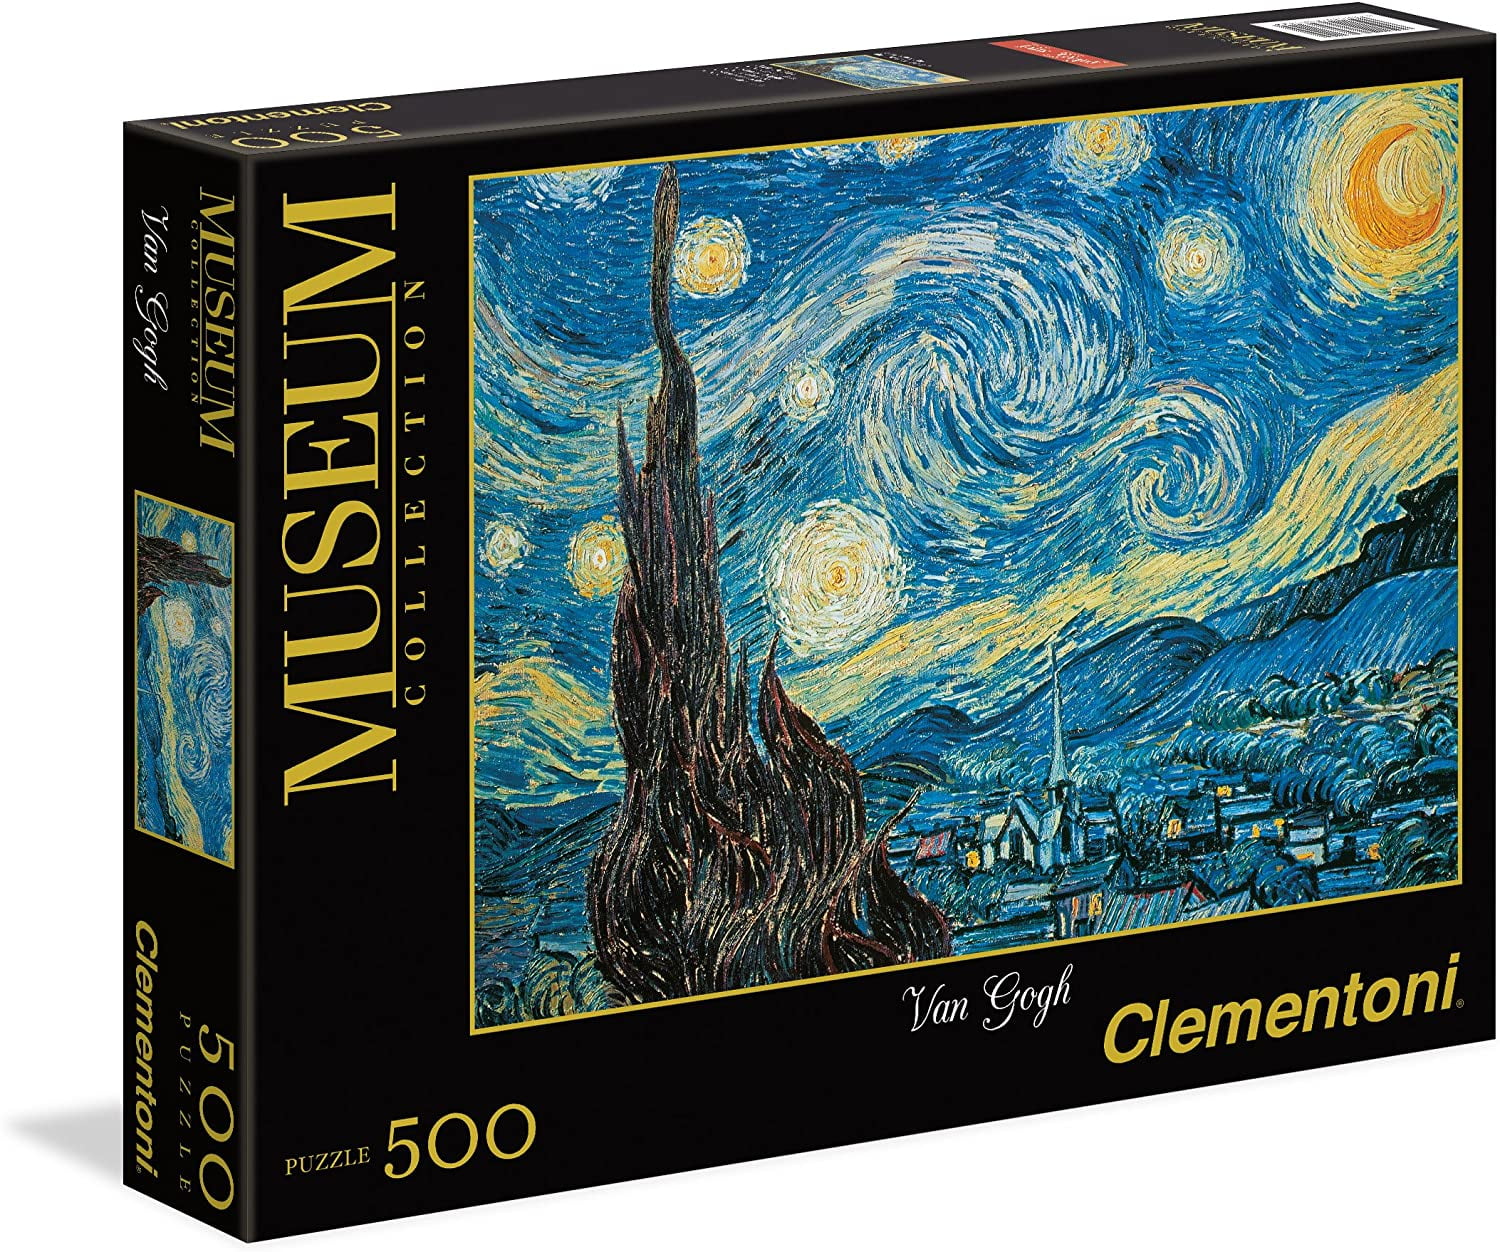 Van Gogh Starry Sky Jigsaw Puzzles 1000 Pieces For Adult Kids Learning Education 